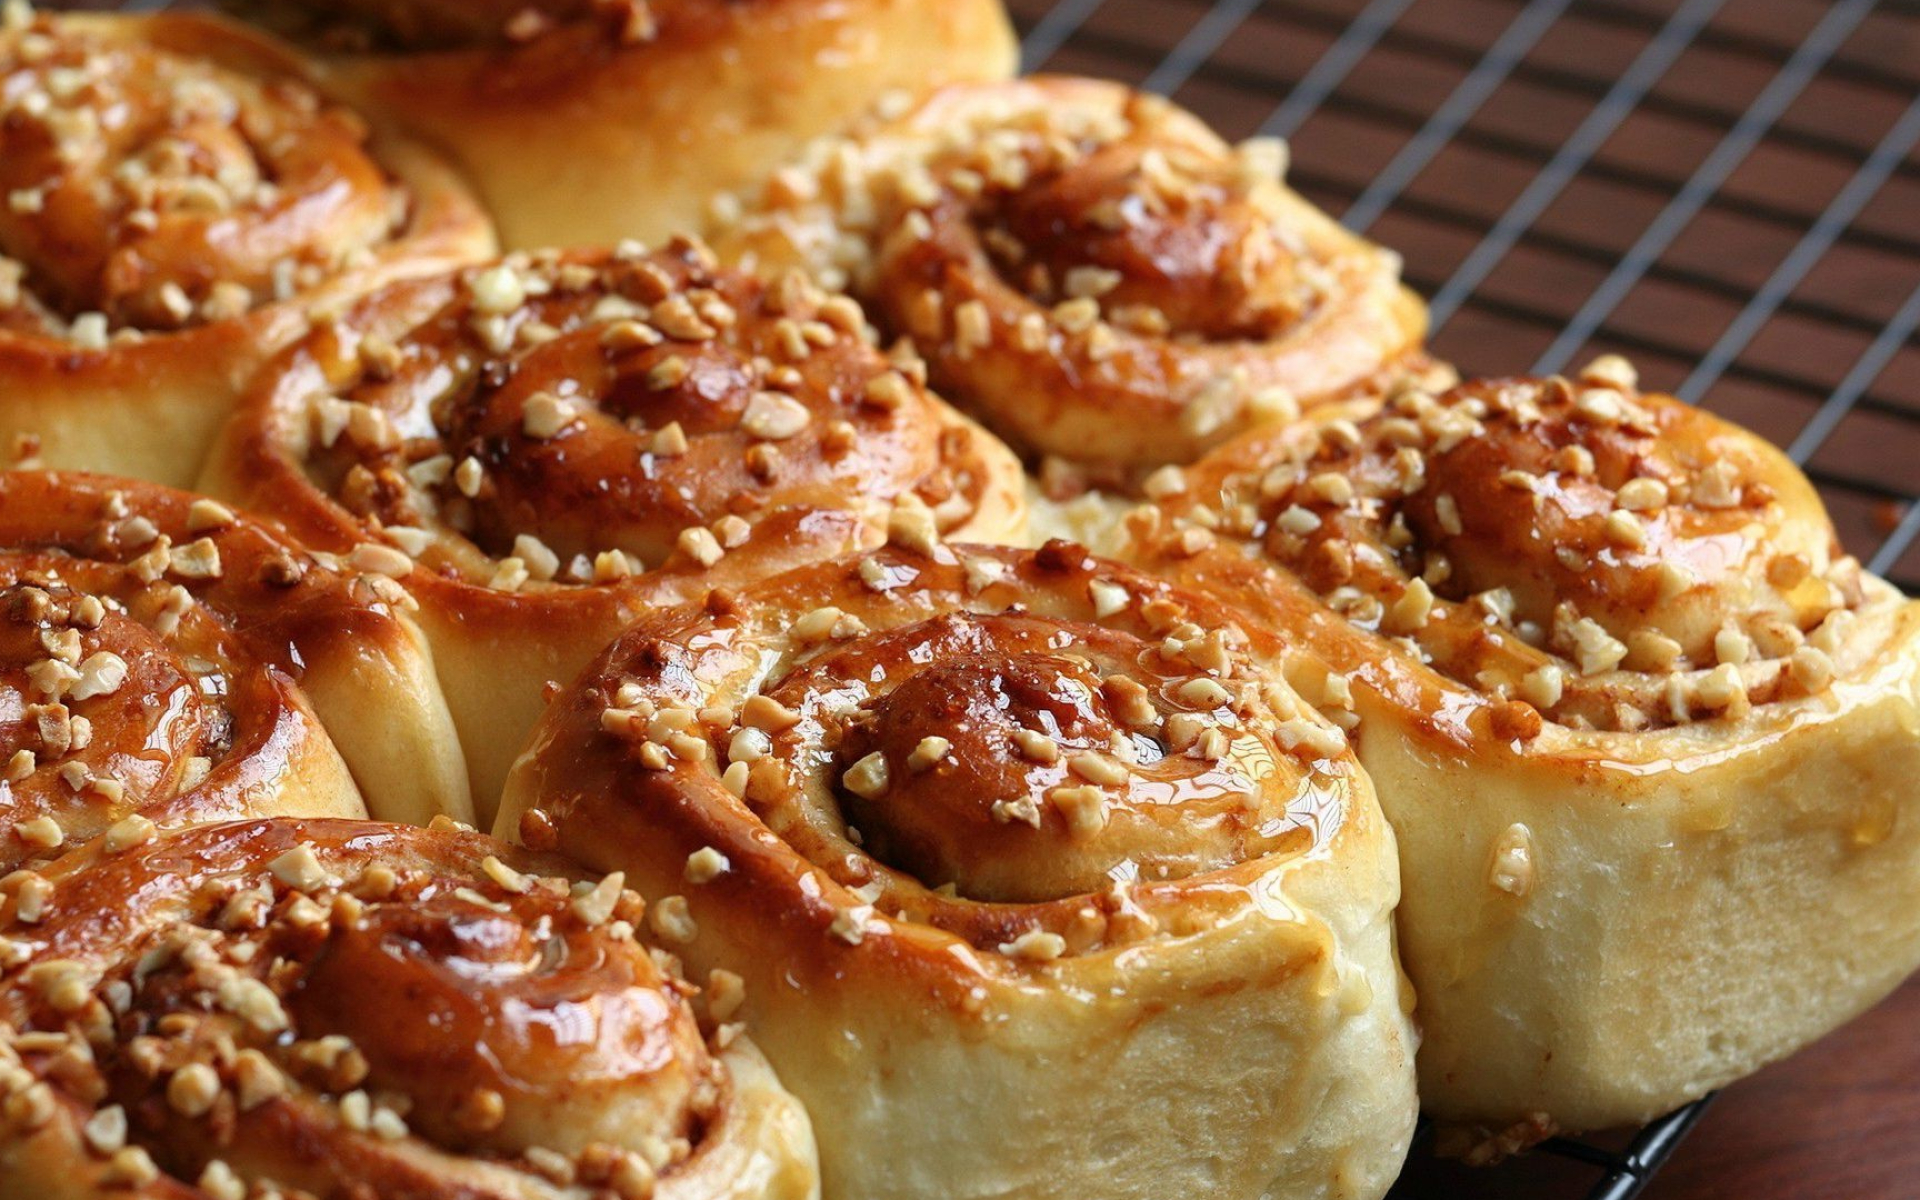 Cinnamon roll: The baking causes the dough to rise and the filling to melt and become gooey. 1920x1200 HD Background.